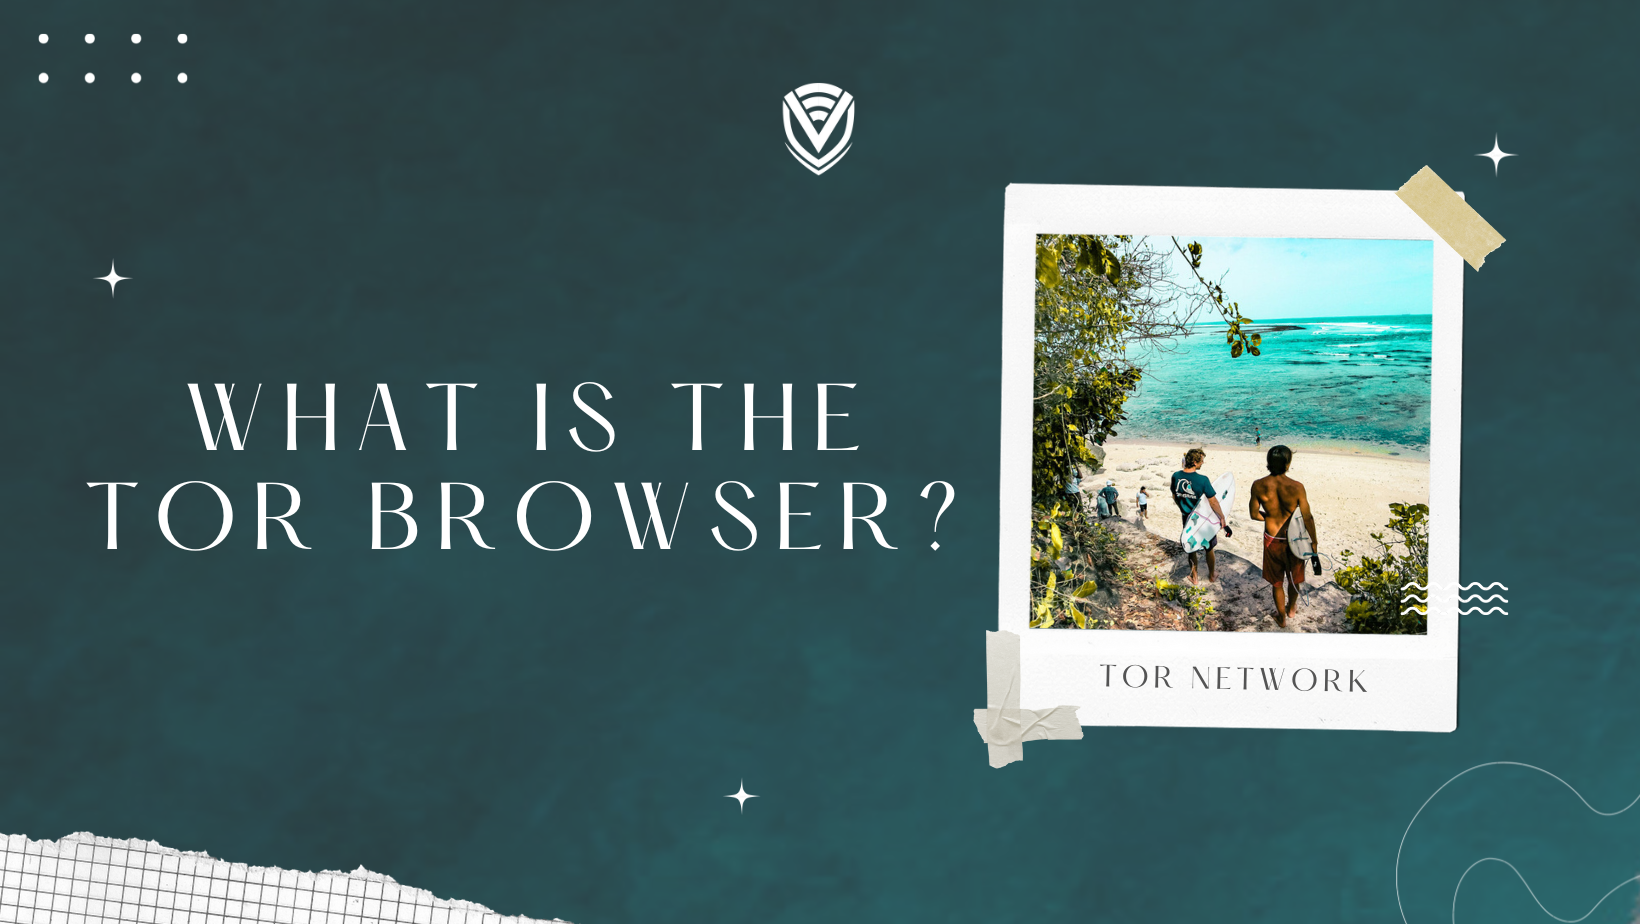 What is Tor browser?